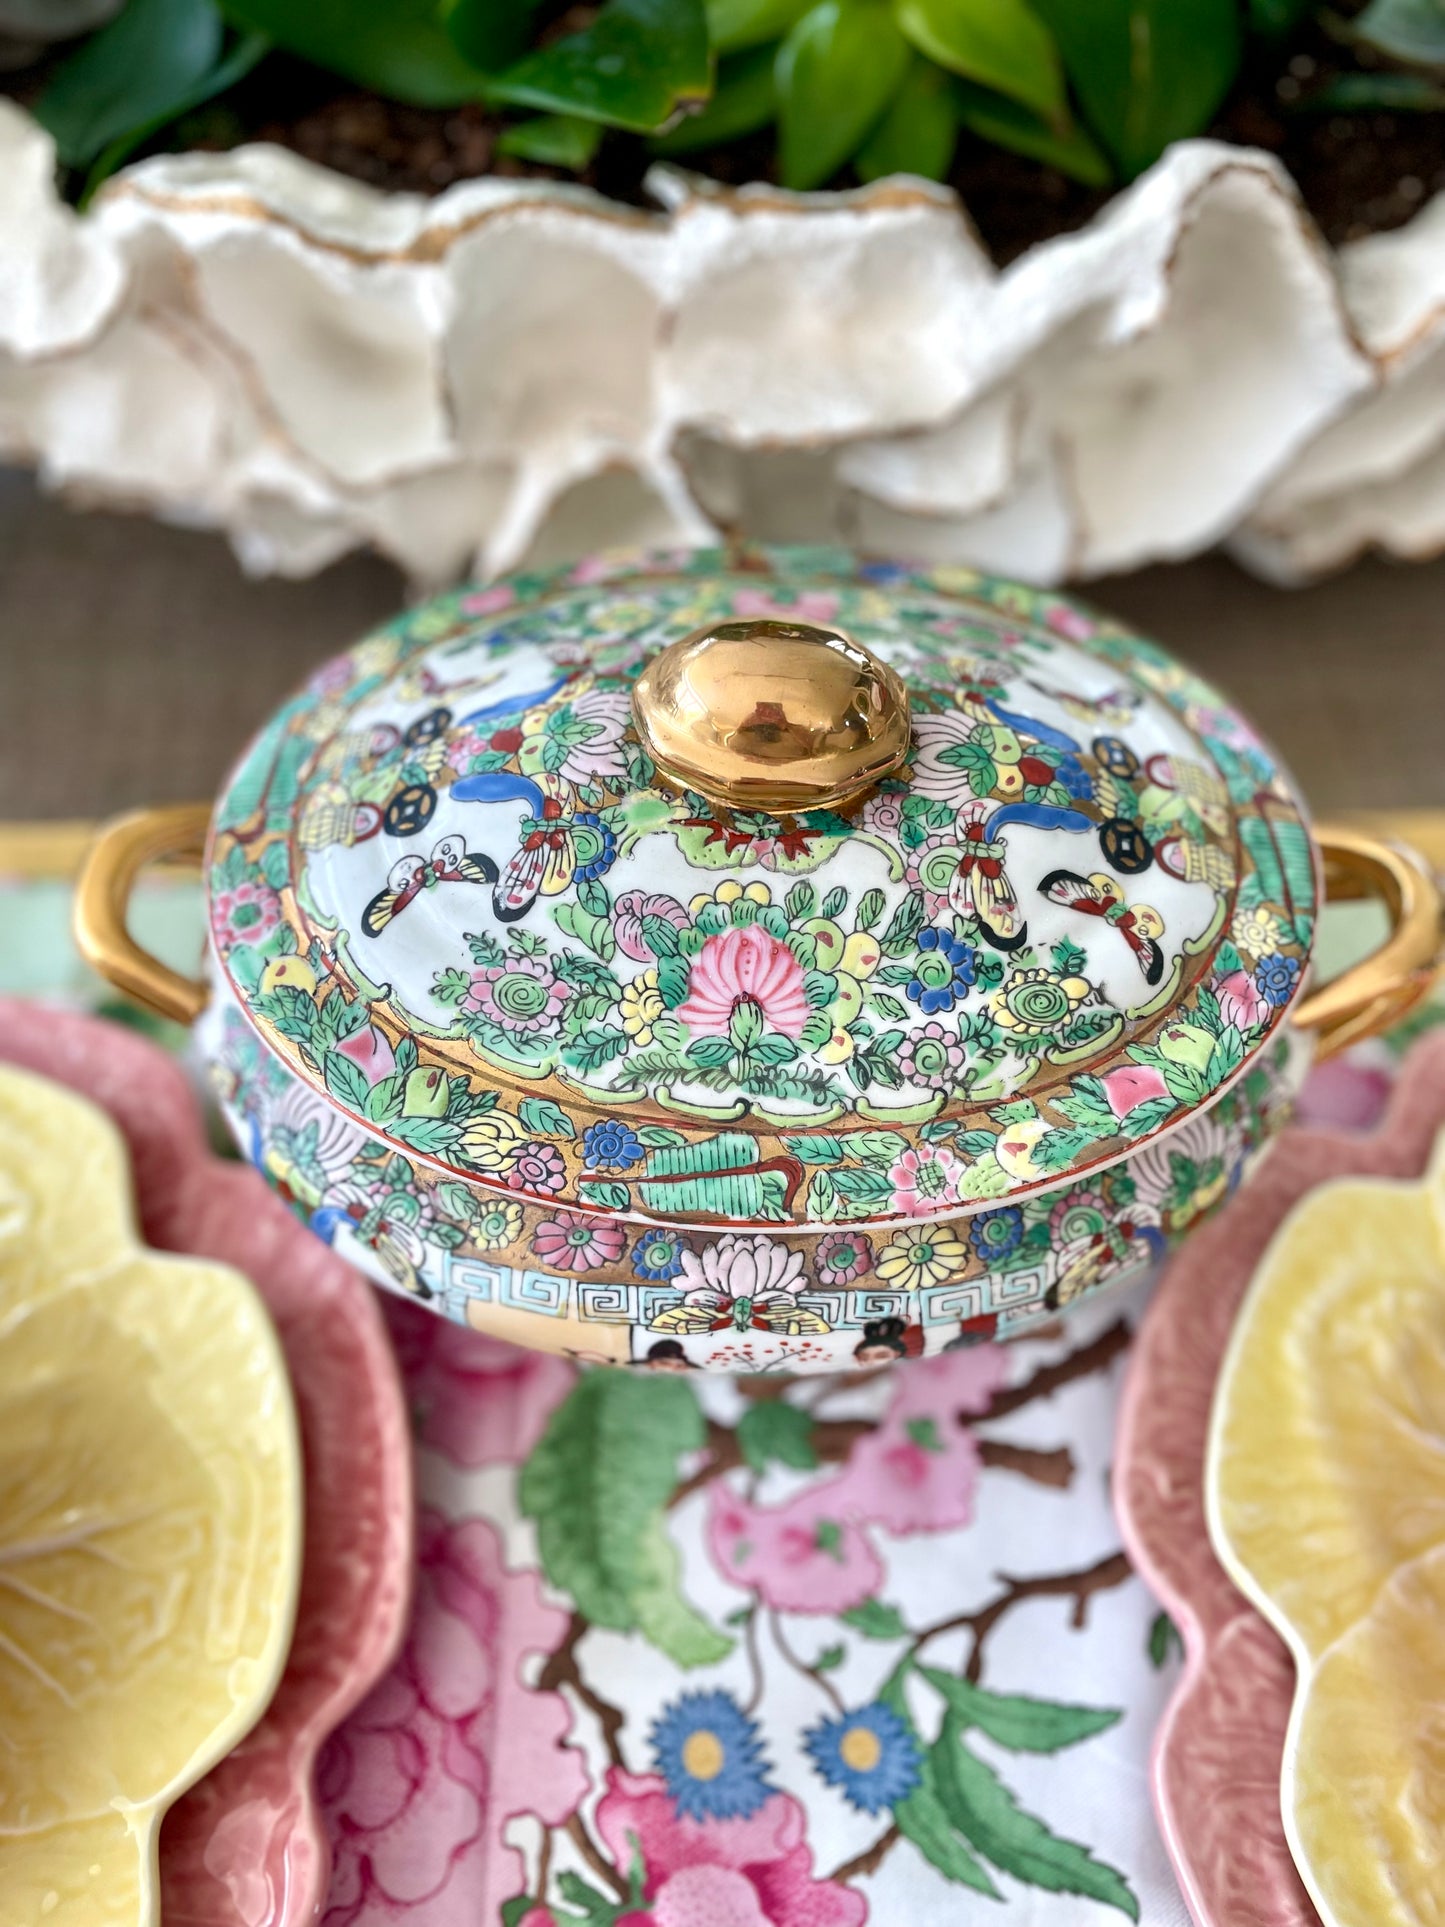 Vintage 12” Hand-Painted Rose Medallion Lidded Tureen with Gold Handles